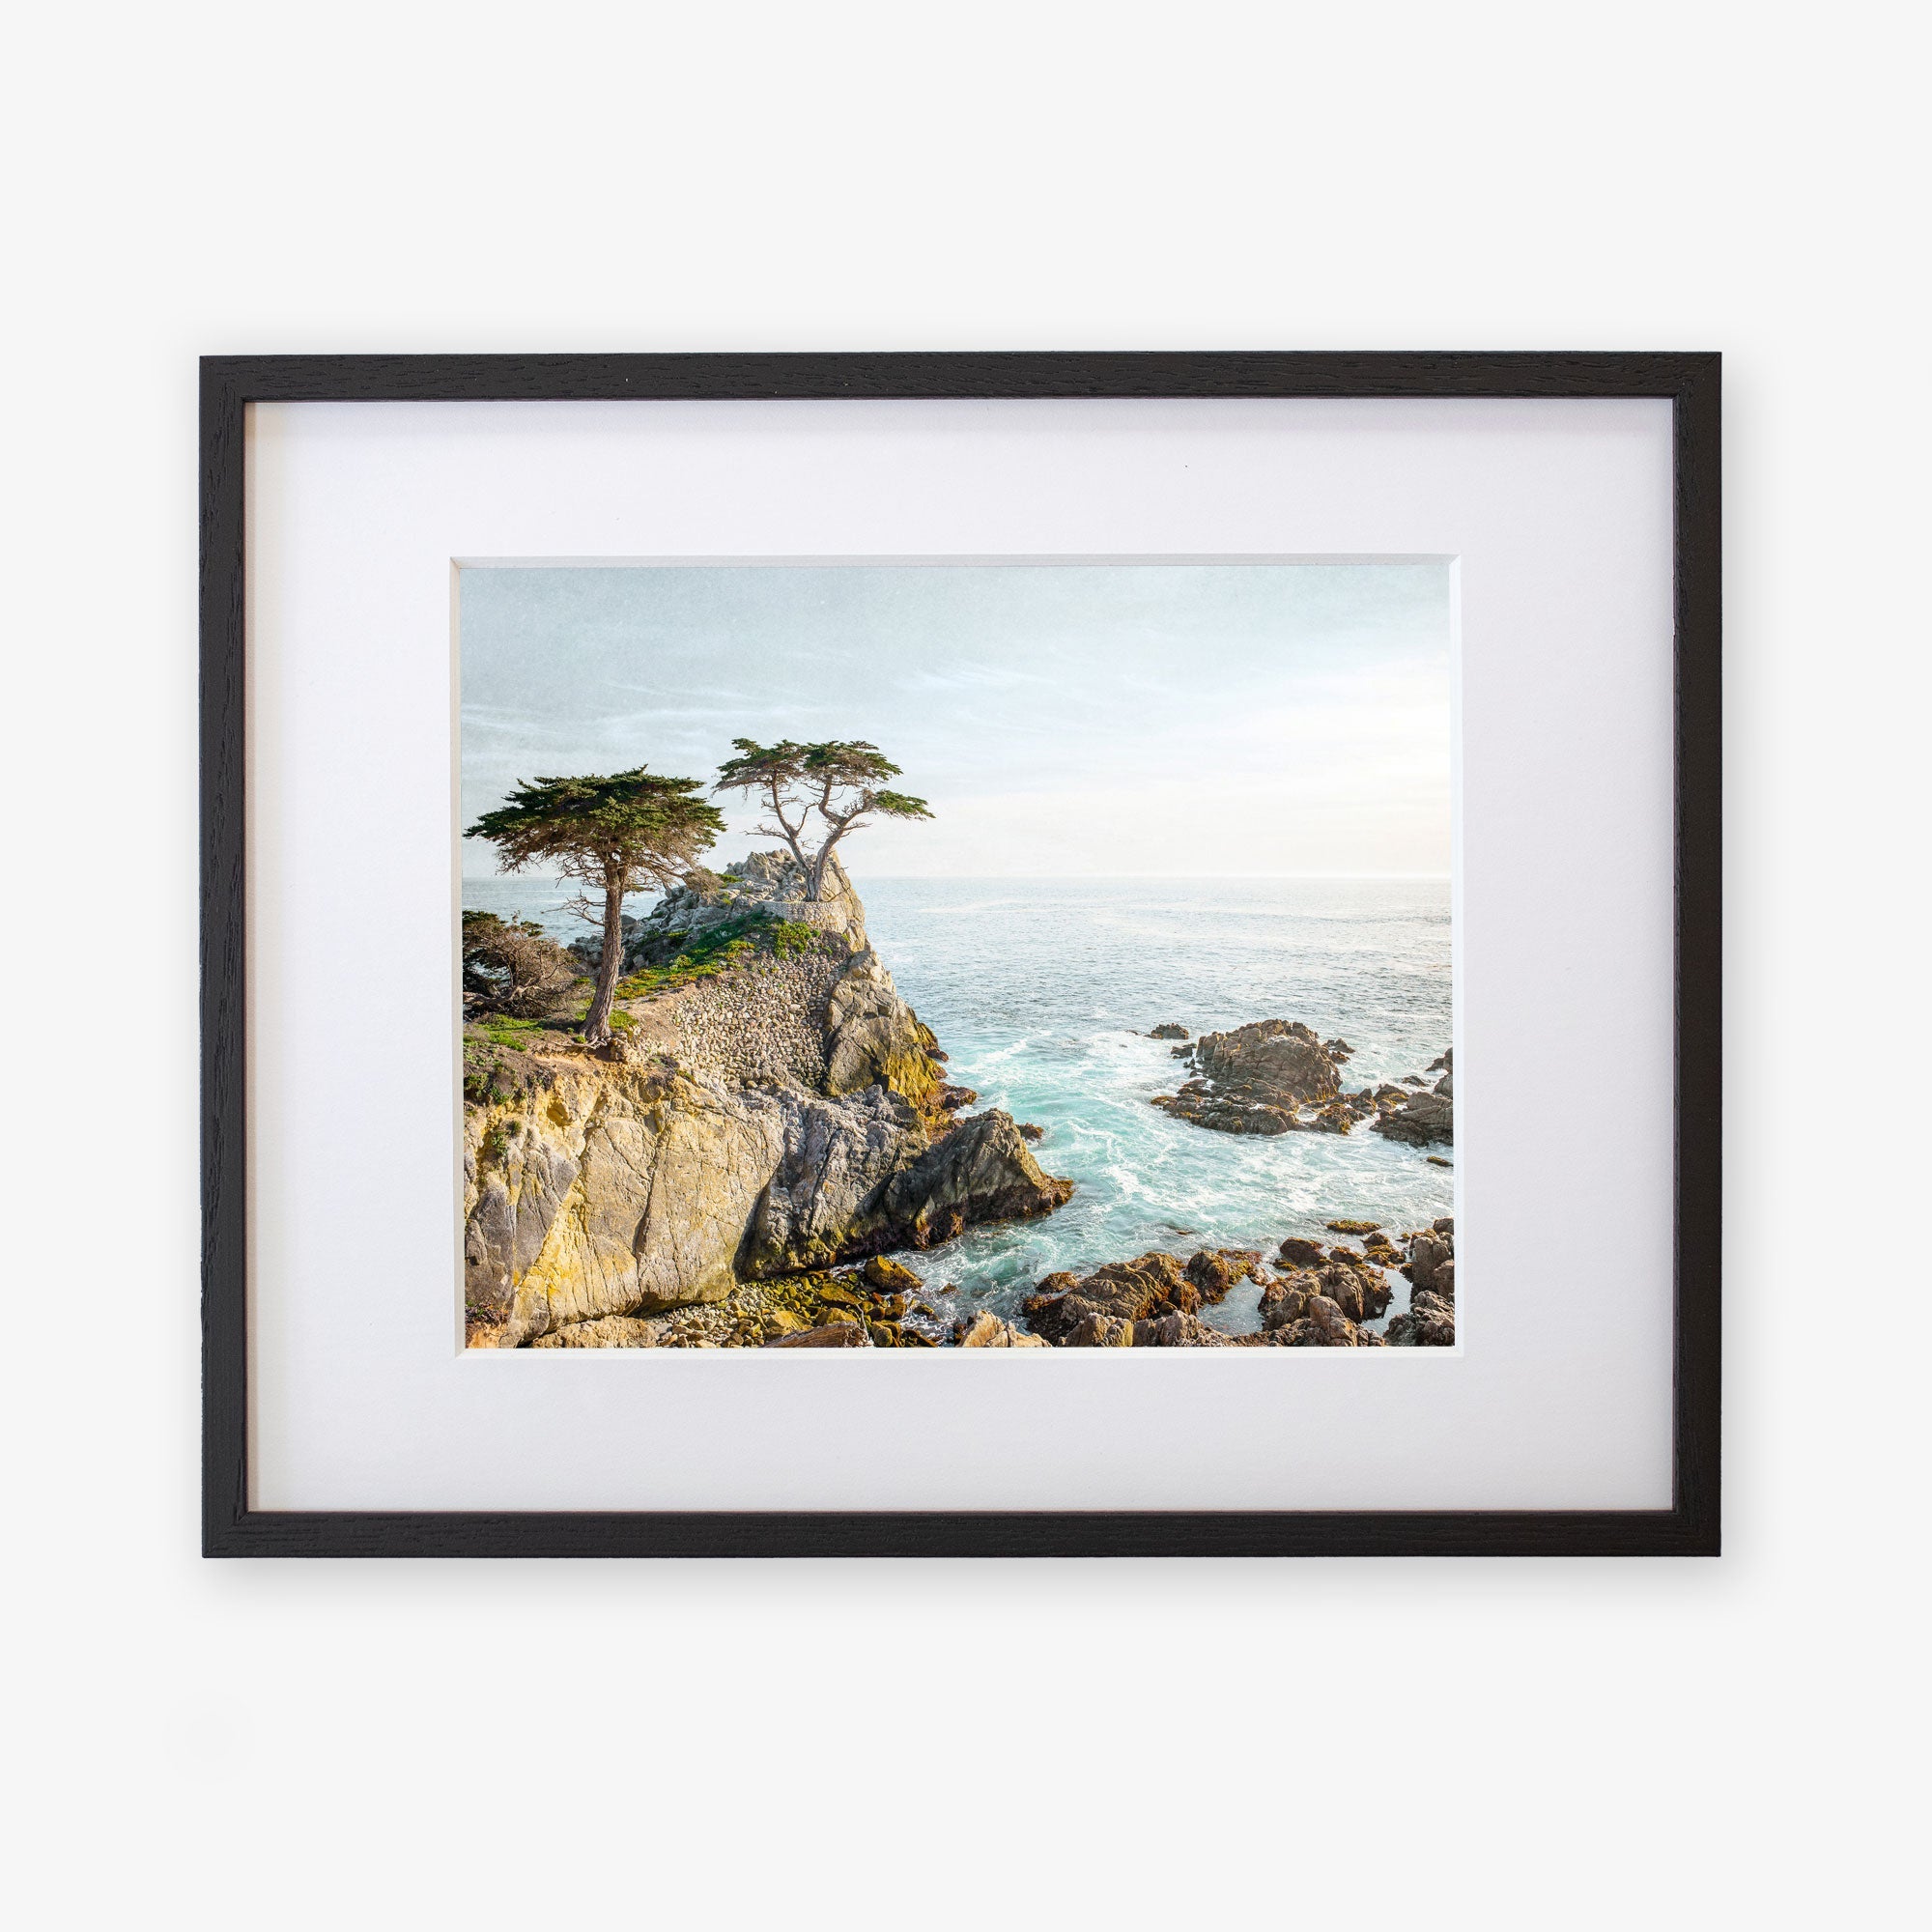 A framed painting of a rocky coastal scene with pine trees overlooking turbulent ocean waves, displayed against a white background on archival photographic paper. This is the Offley Green California Coastal Print, &#39;Lone Cypress&#39;.